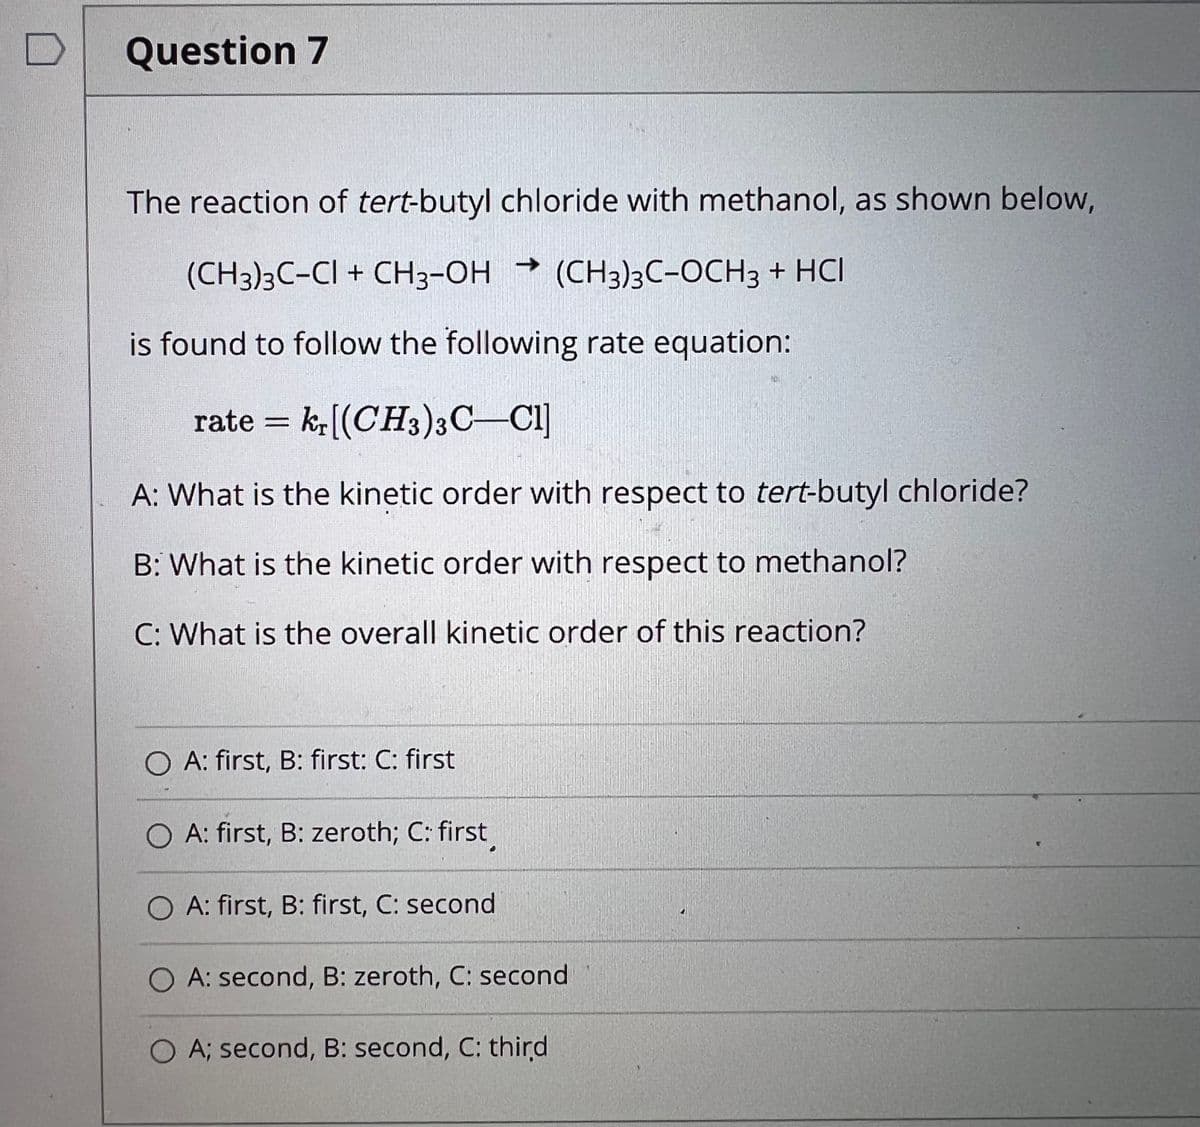 Question 7
The reaction of tert-butyl chloride with methanol, as shown below,
(CH3)3C-CI + CH3-OH (CH3)3C-OCH3 + HCI
is found to follow the following rate equation:
rate = k,((CH3)3C–CI]
A: What is the kinetic order with respect to tert-butyl chloride?
B: What is the kinetic order with respect to methanol?
C: What is the overall kinetic order of this reaction?
O A: first, B: first: C: first
O A: first, B: zeroth; C: first
O A: first, B: first, C: second
O A: second, B: zeroth, C: second
O A; second, B: second, C: third
